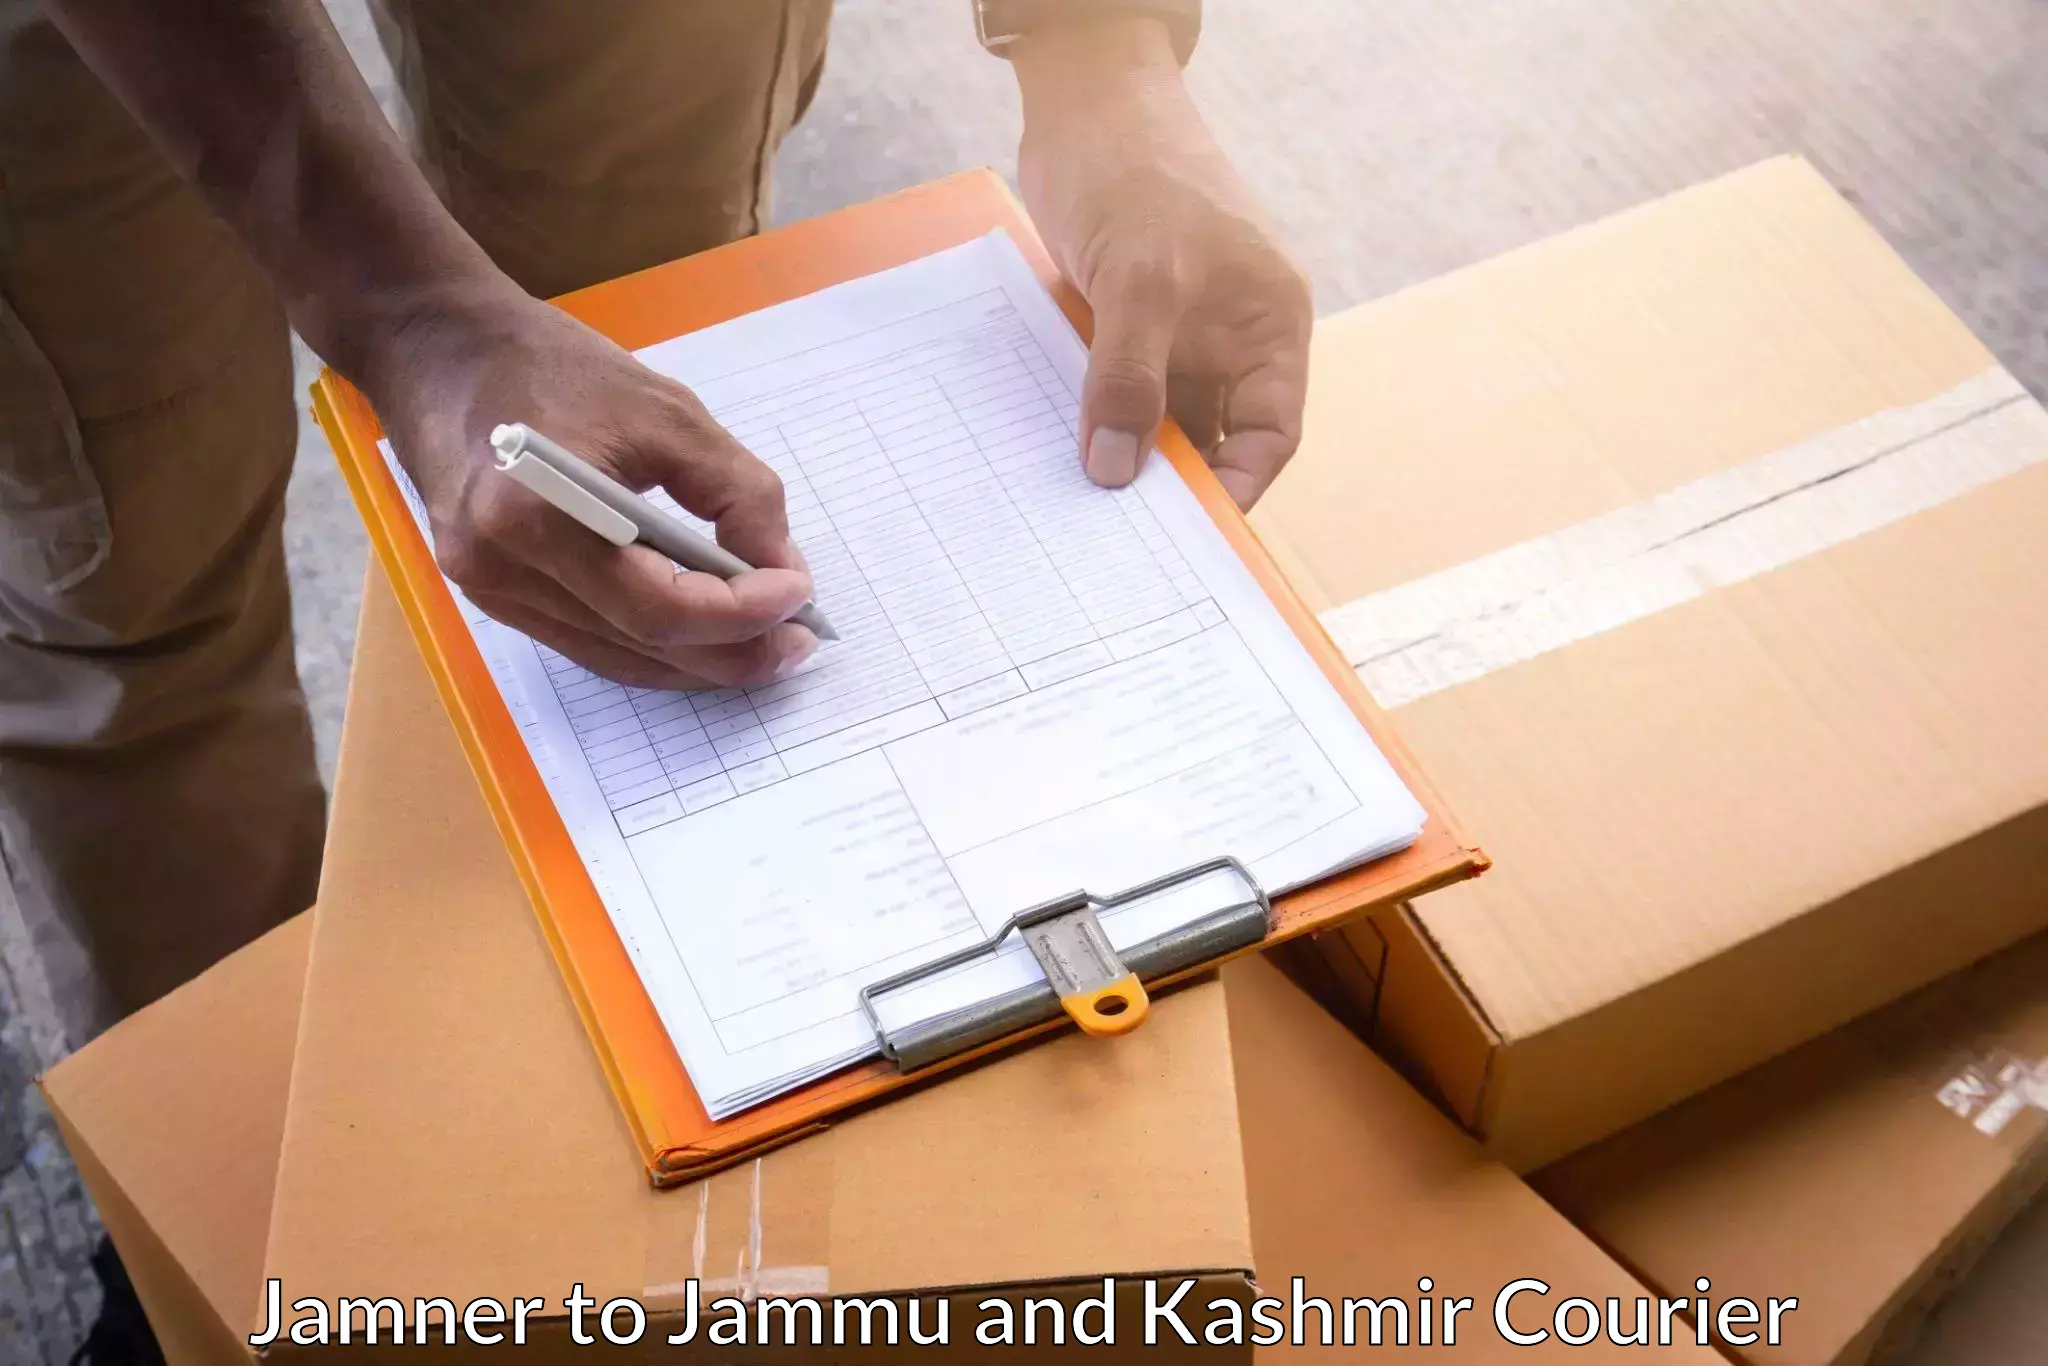 High-capacity parcel service Jamner to Poonch